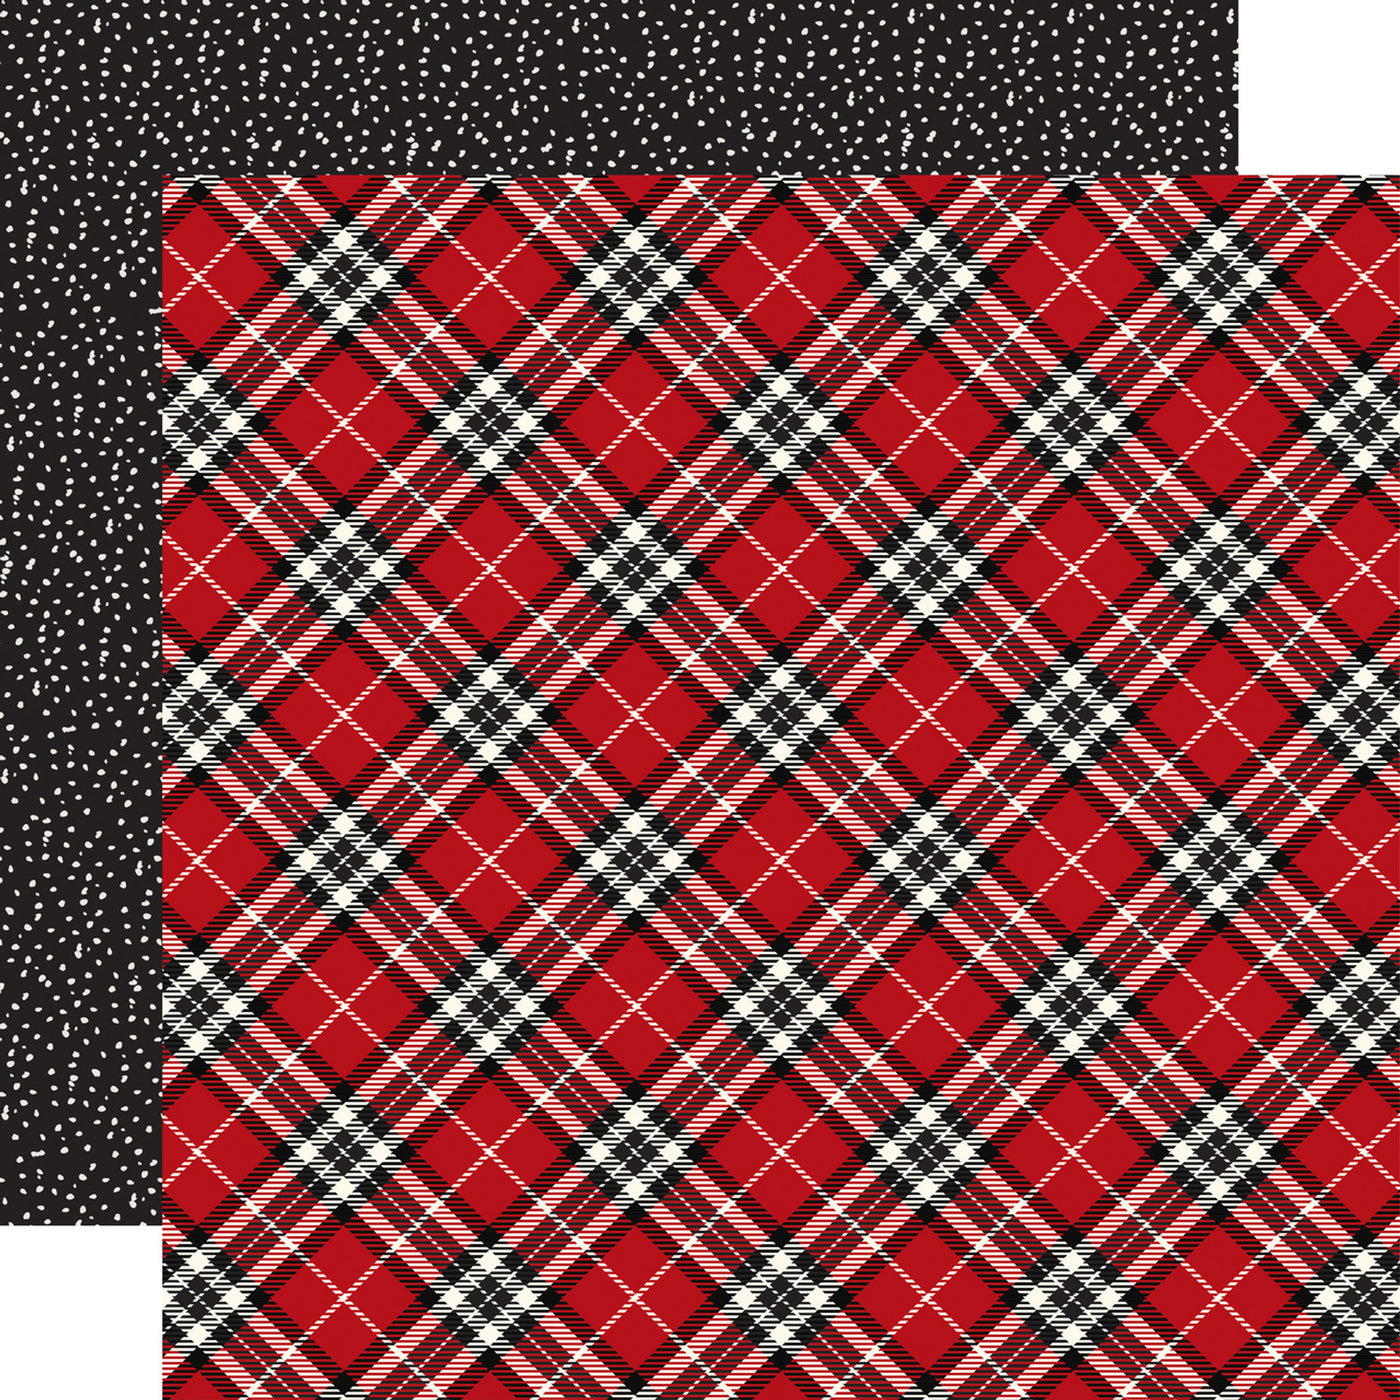 Double-sided 12x12 cardstock with red, black, and white plaid; the reverse is white dots on a black background. 80 lb cover. Felt texture.